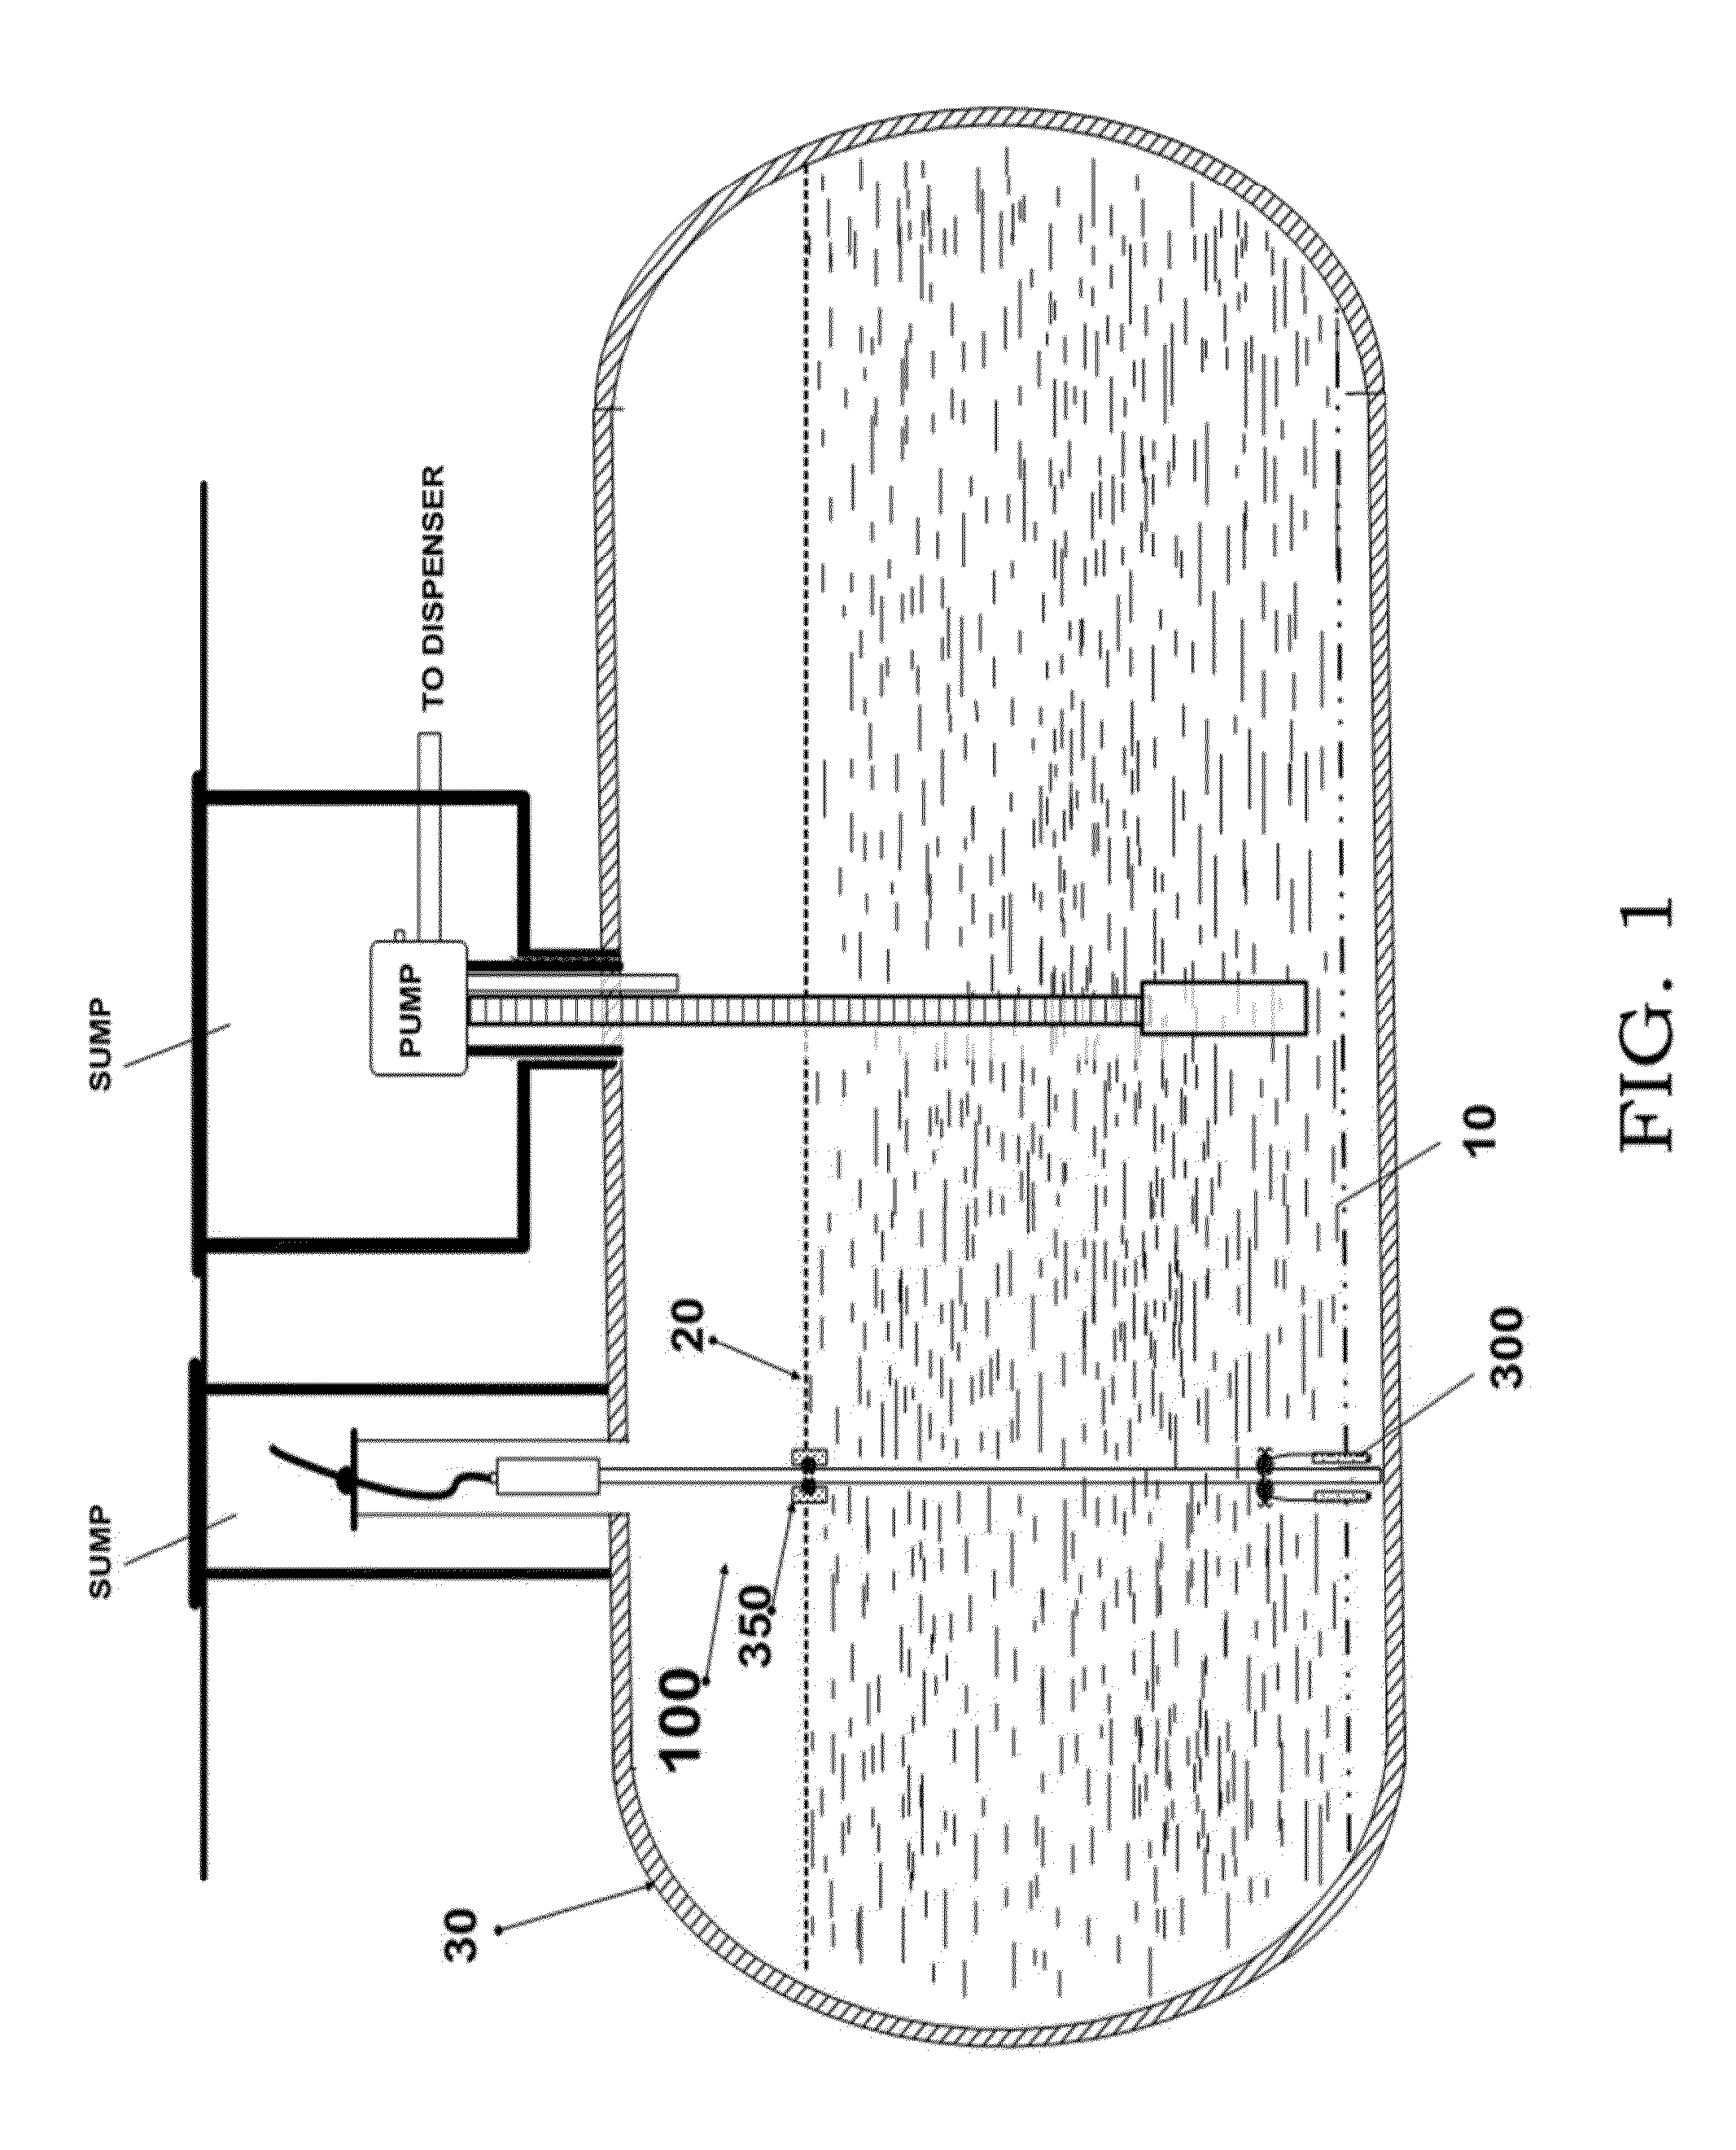 Magnetostrictive probe with inverted signal detection